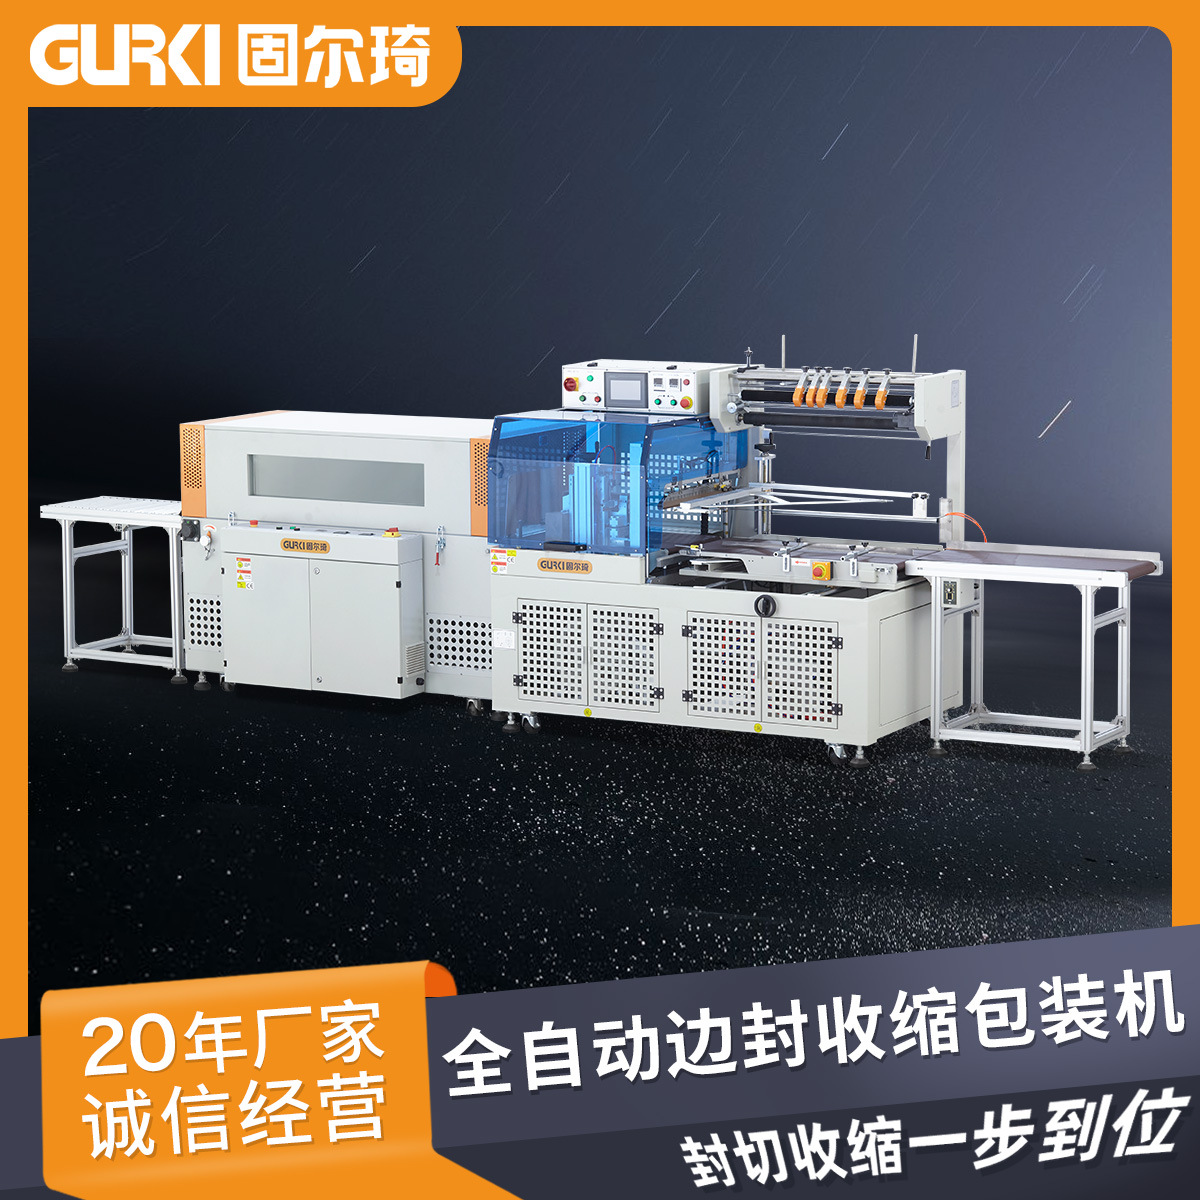 Kouqi factory customized Sealing and cutting Shrink machine Book fully automatic Shrink Packaging machine PE Film sealing and cutting machine